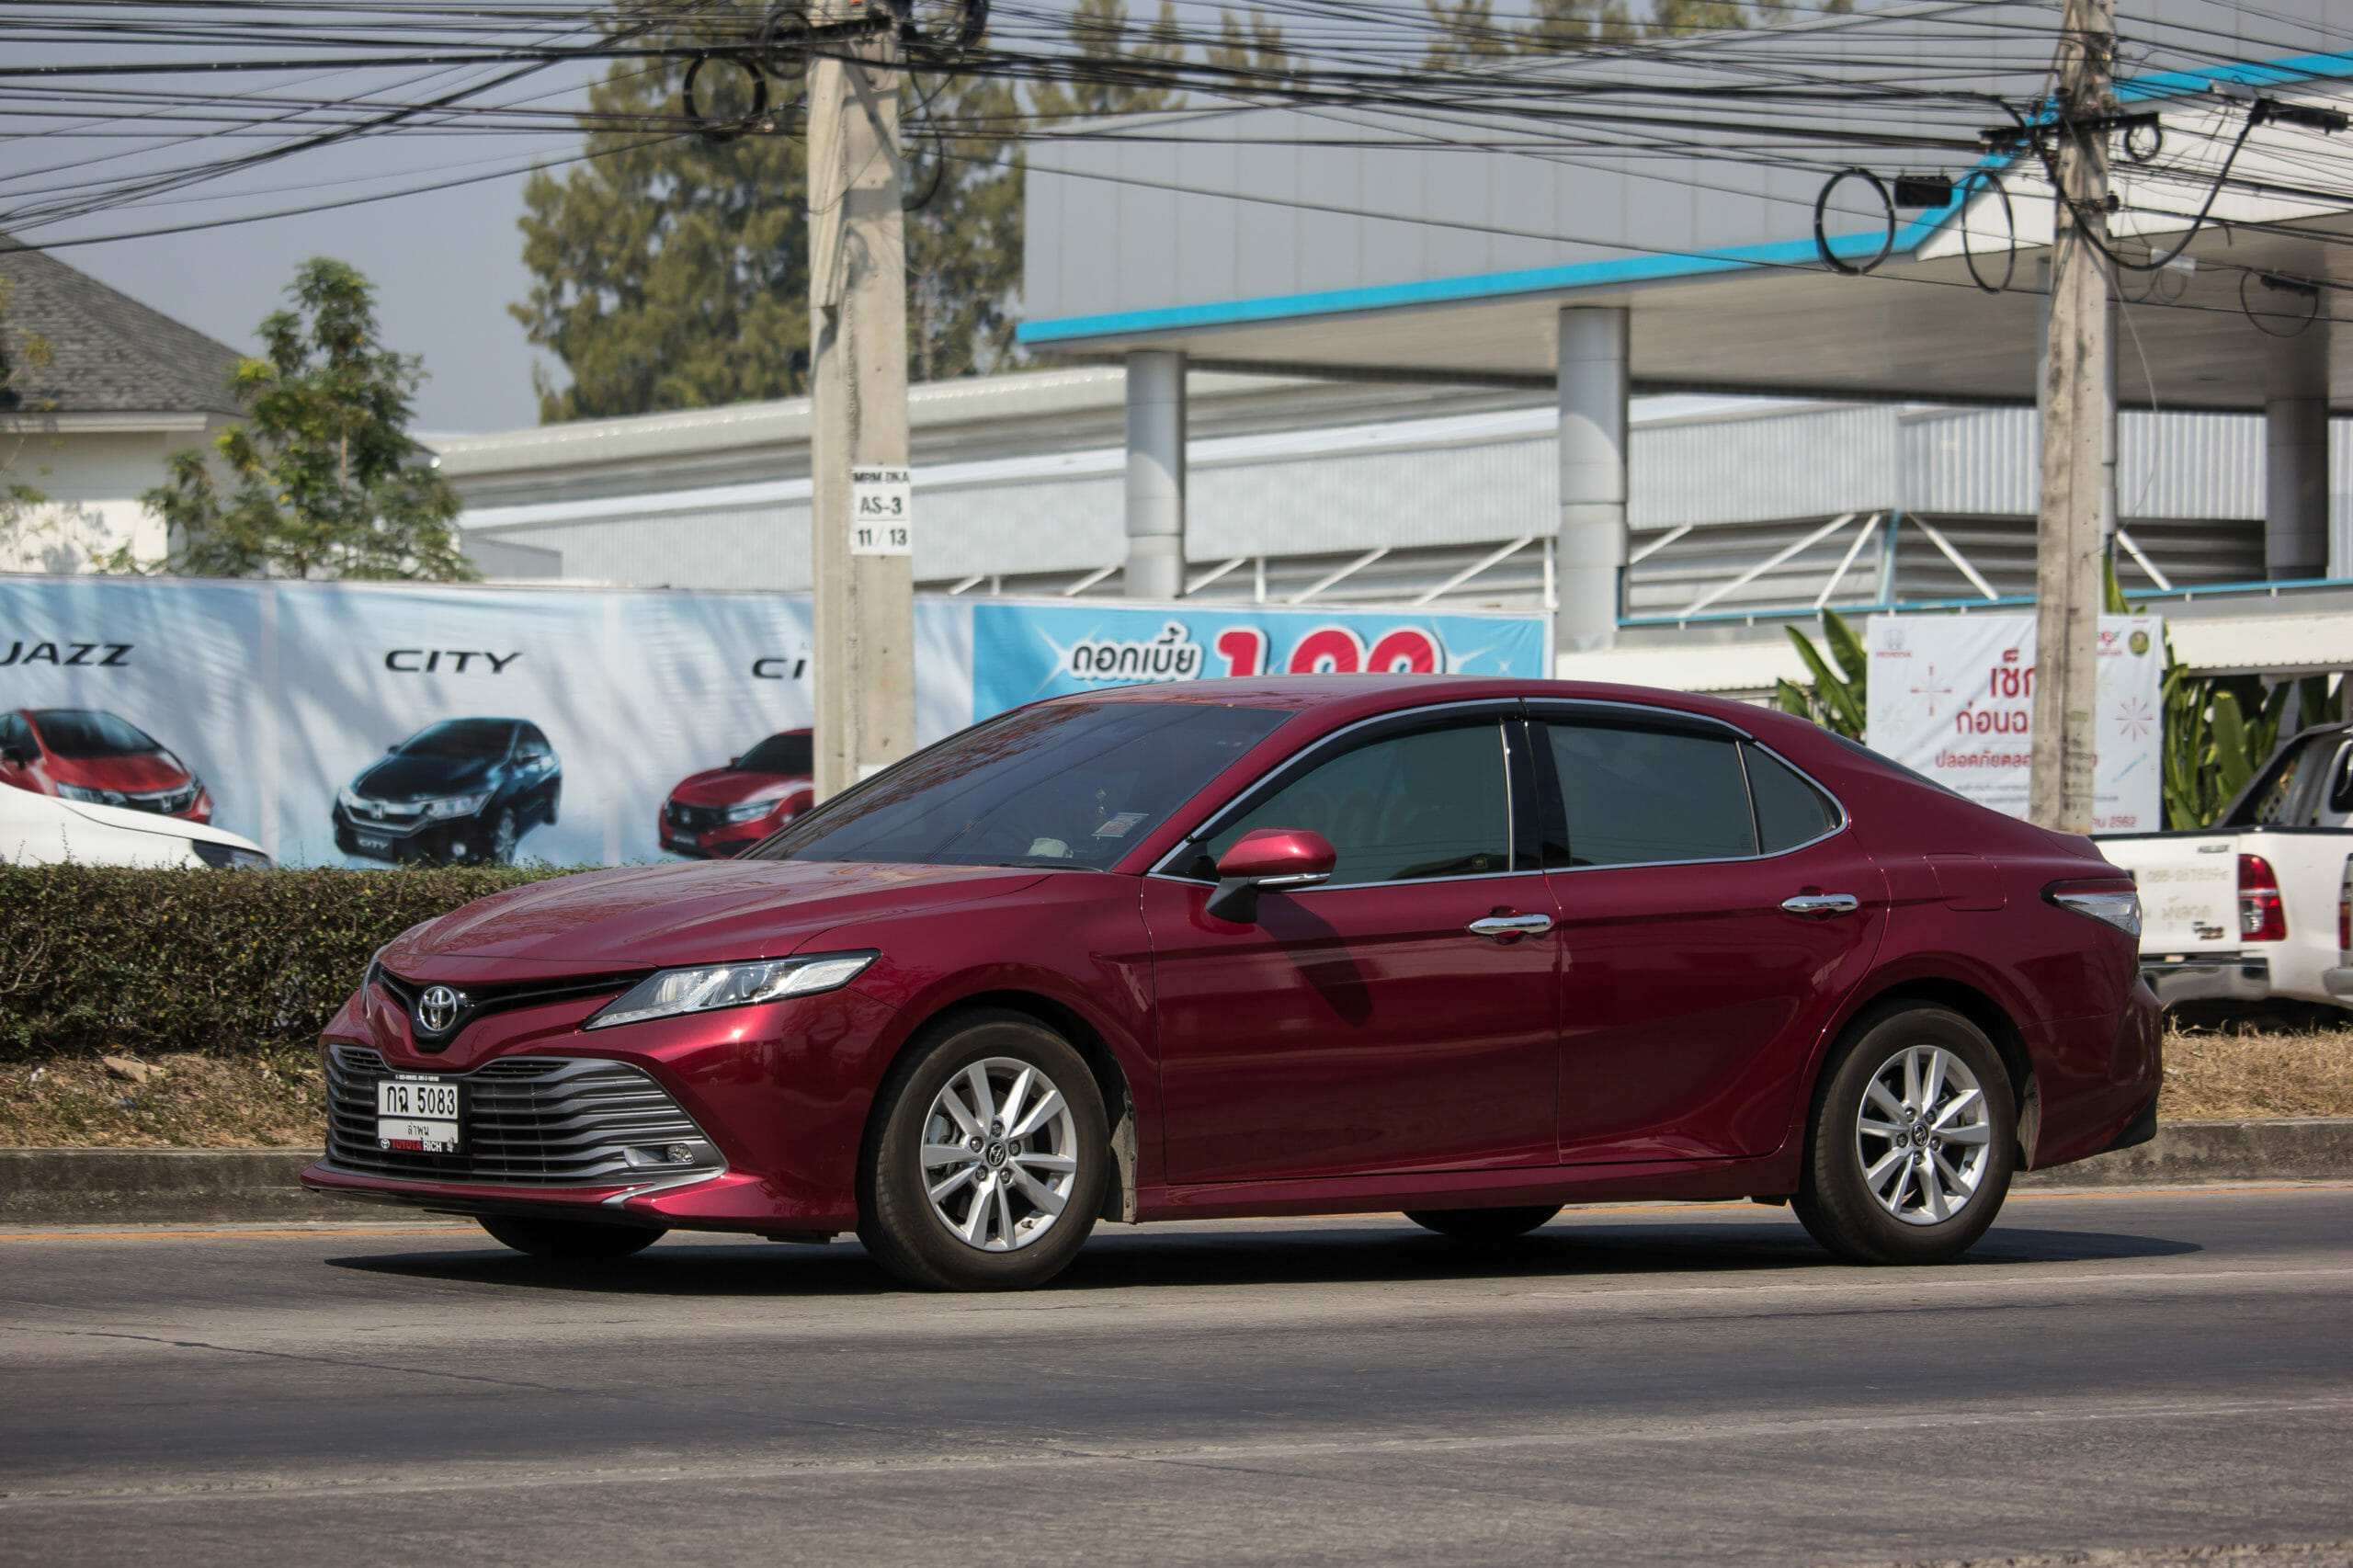 2019 Toyota Camry driving through city - Vehicle History